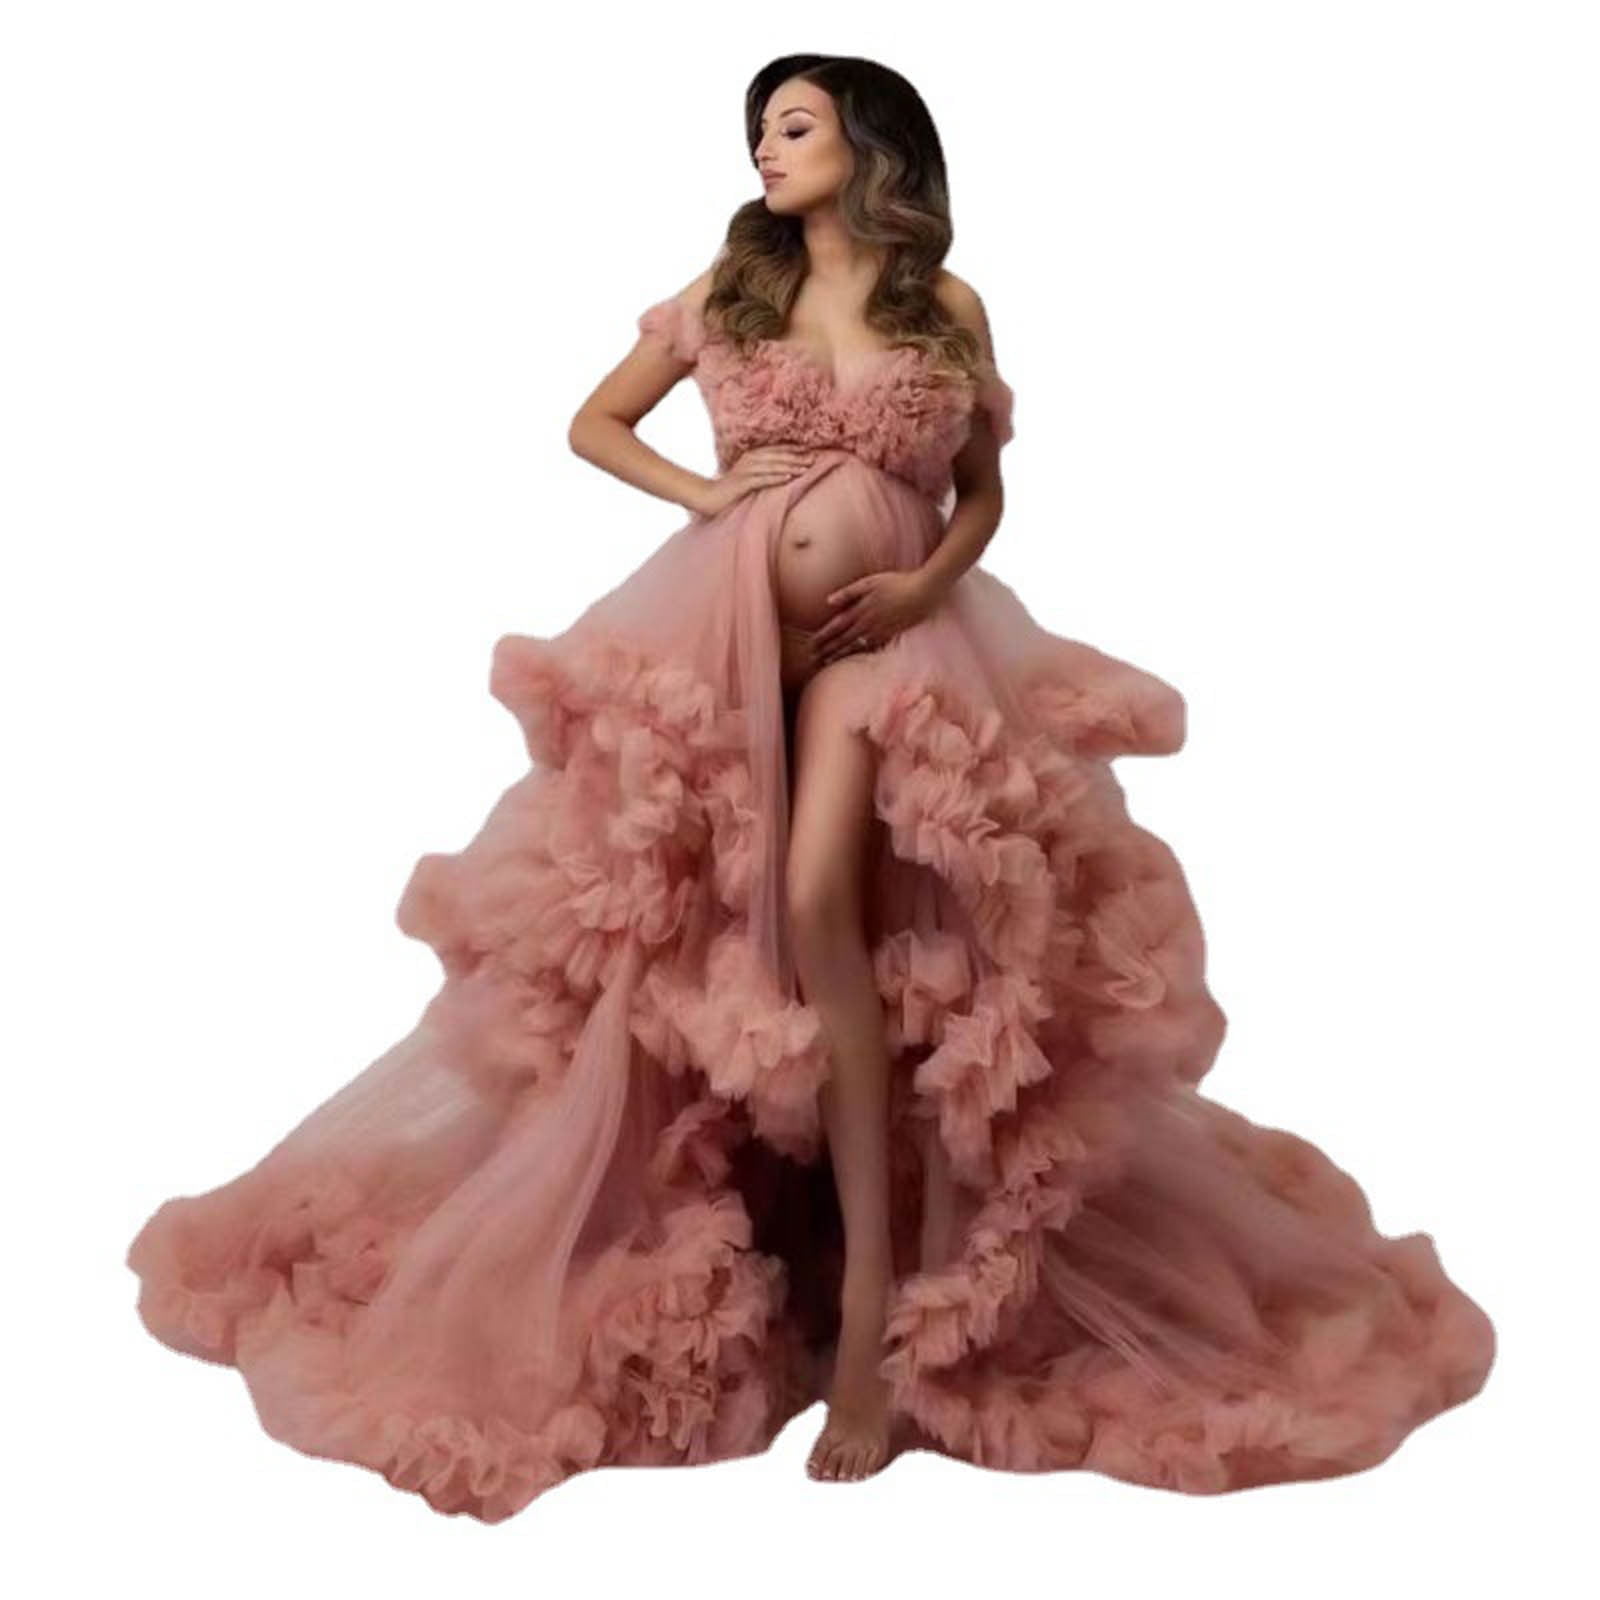 Maternity Shoot Gowns – Style Icon www.dressrent.in